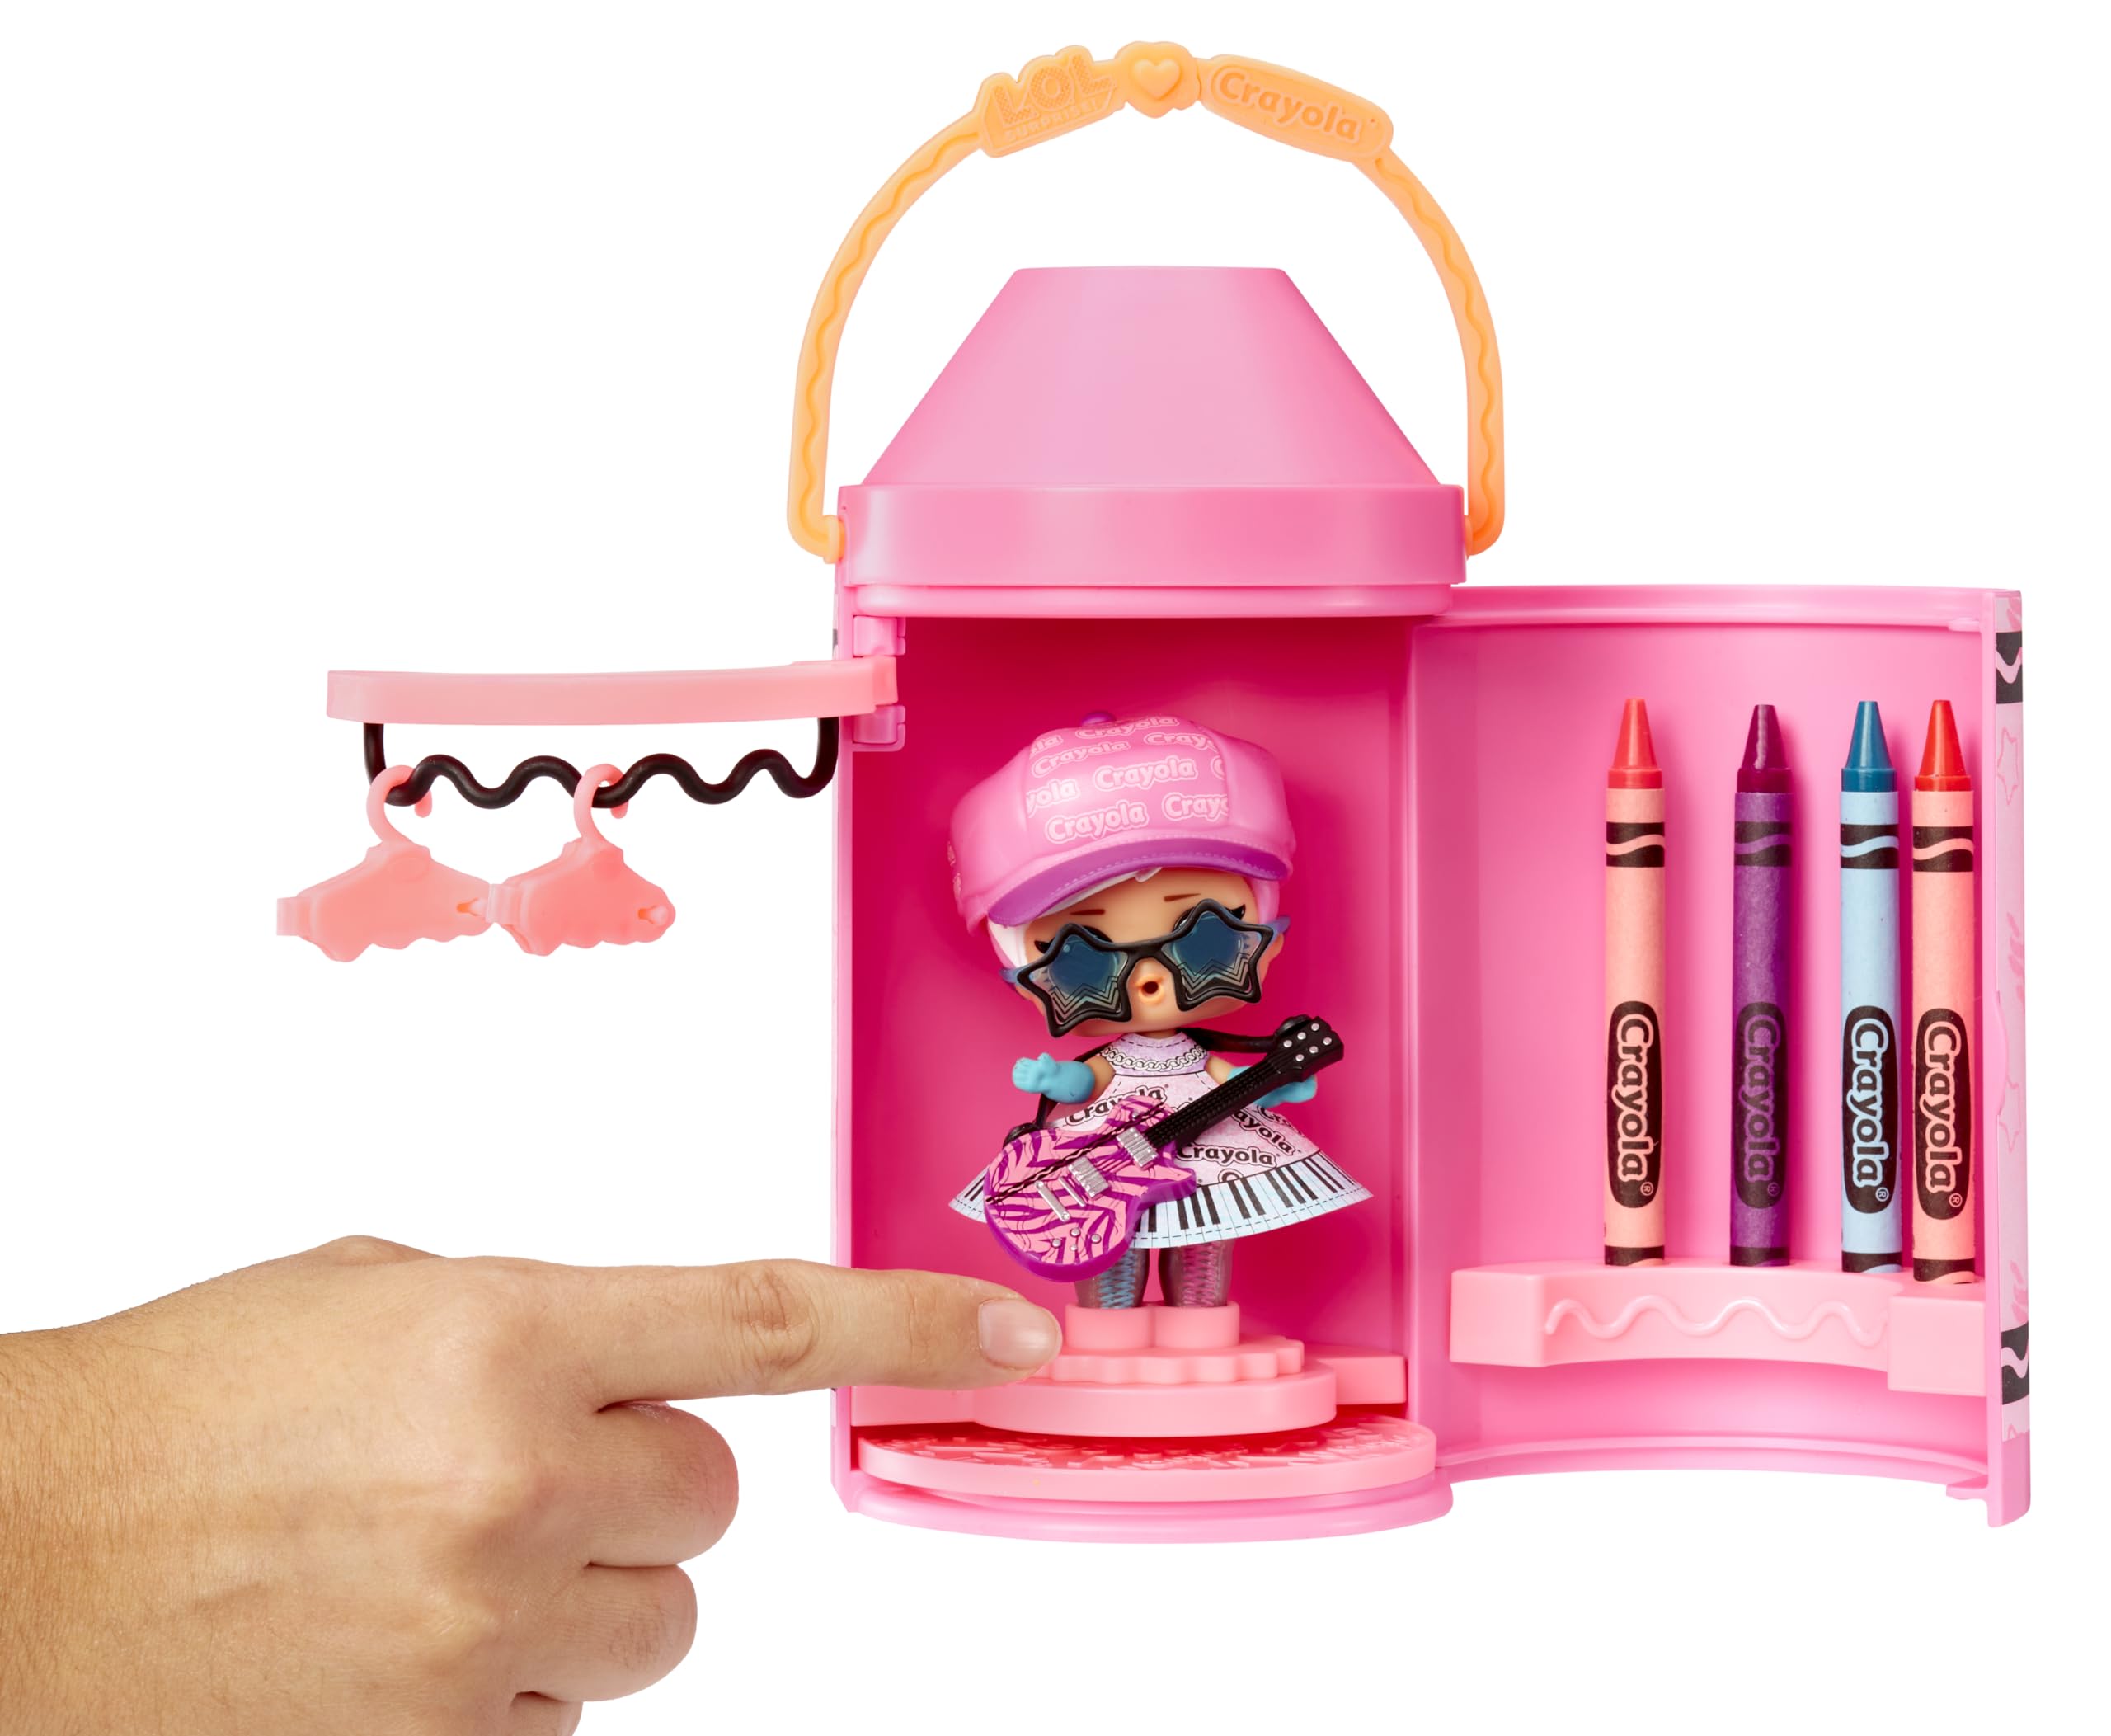 L.O.L. Surprise! Loves CRAYOLA Color Me Studio with Collectible Doll, Over 30 Surprises, Paper Dresses, Crayon Dolls, Art Studio Packaging, Crayon Capsule Packaging, Limited Edition Doll 3+